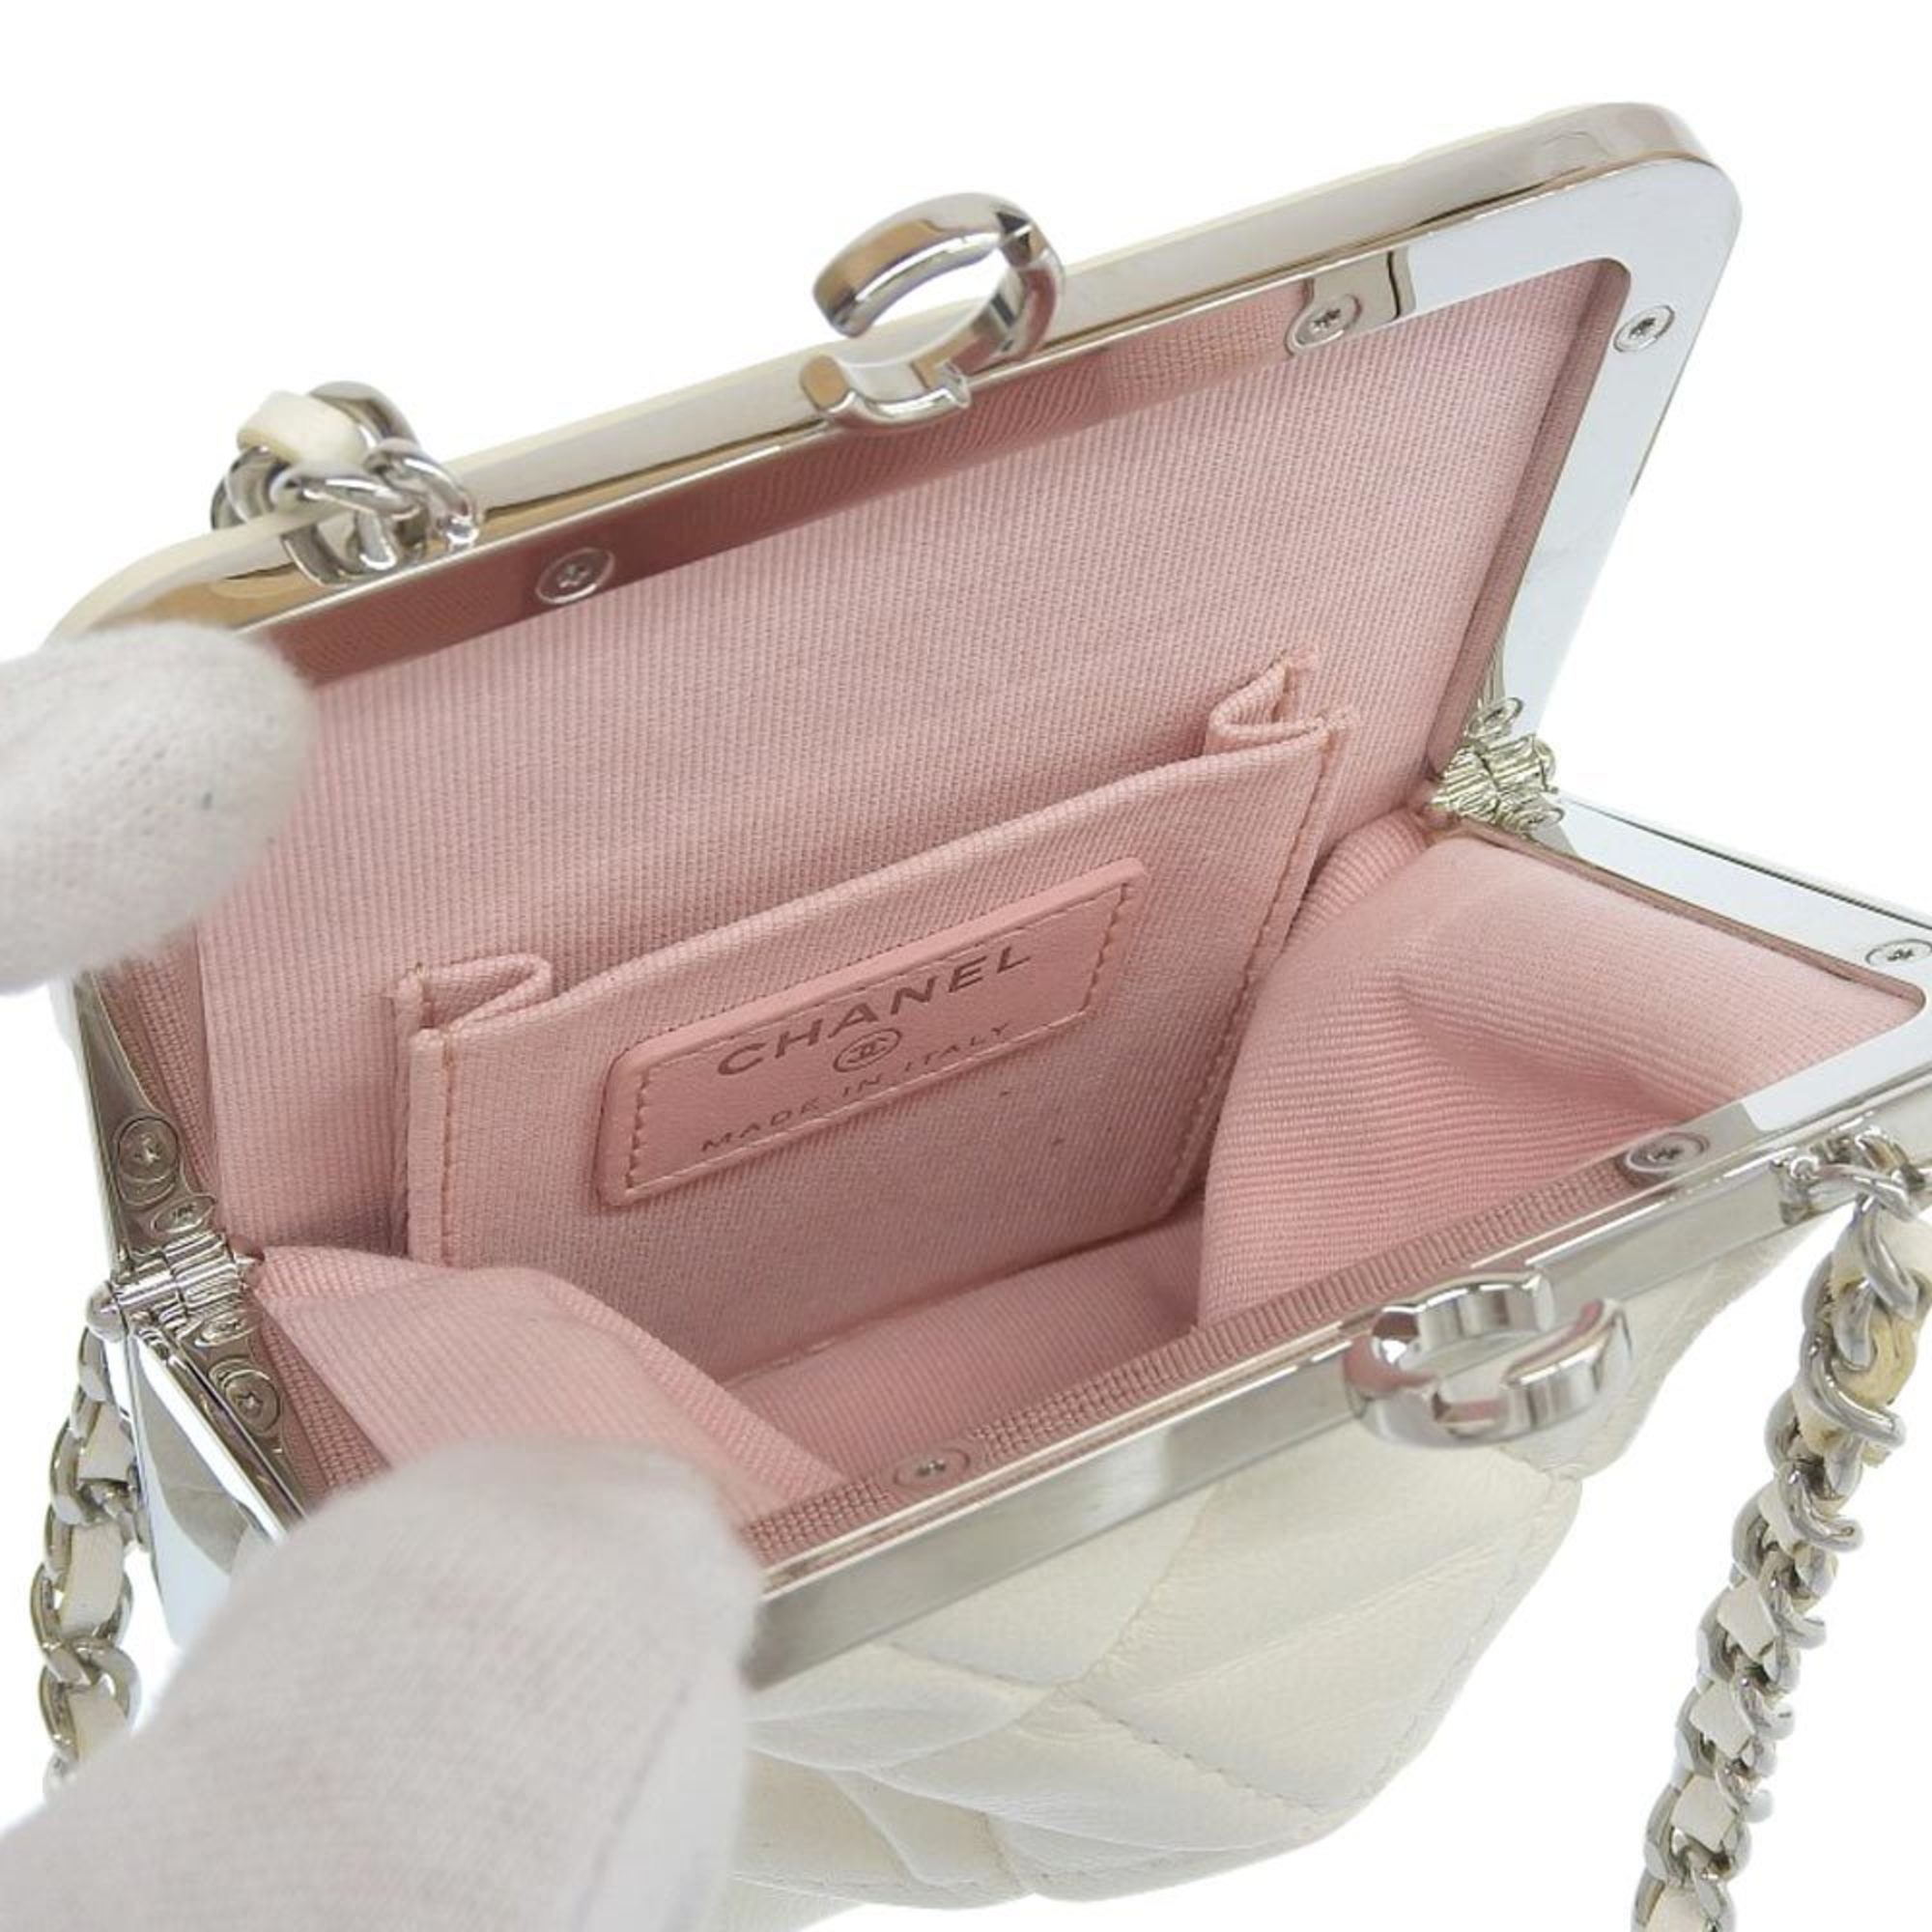 Chanel CHANEL here mark clutch shoulder bag with white seal 3 AP2496